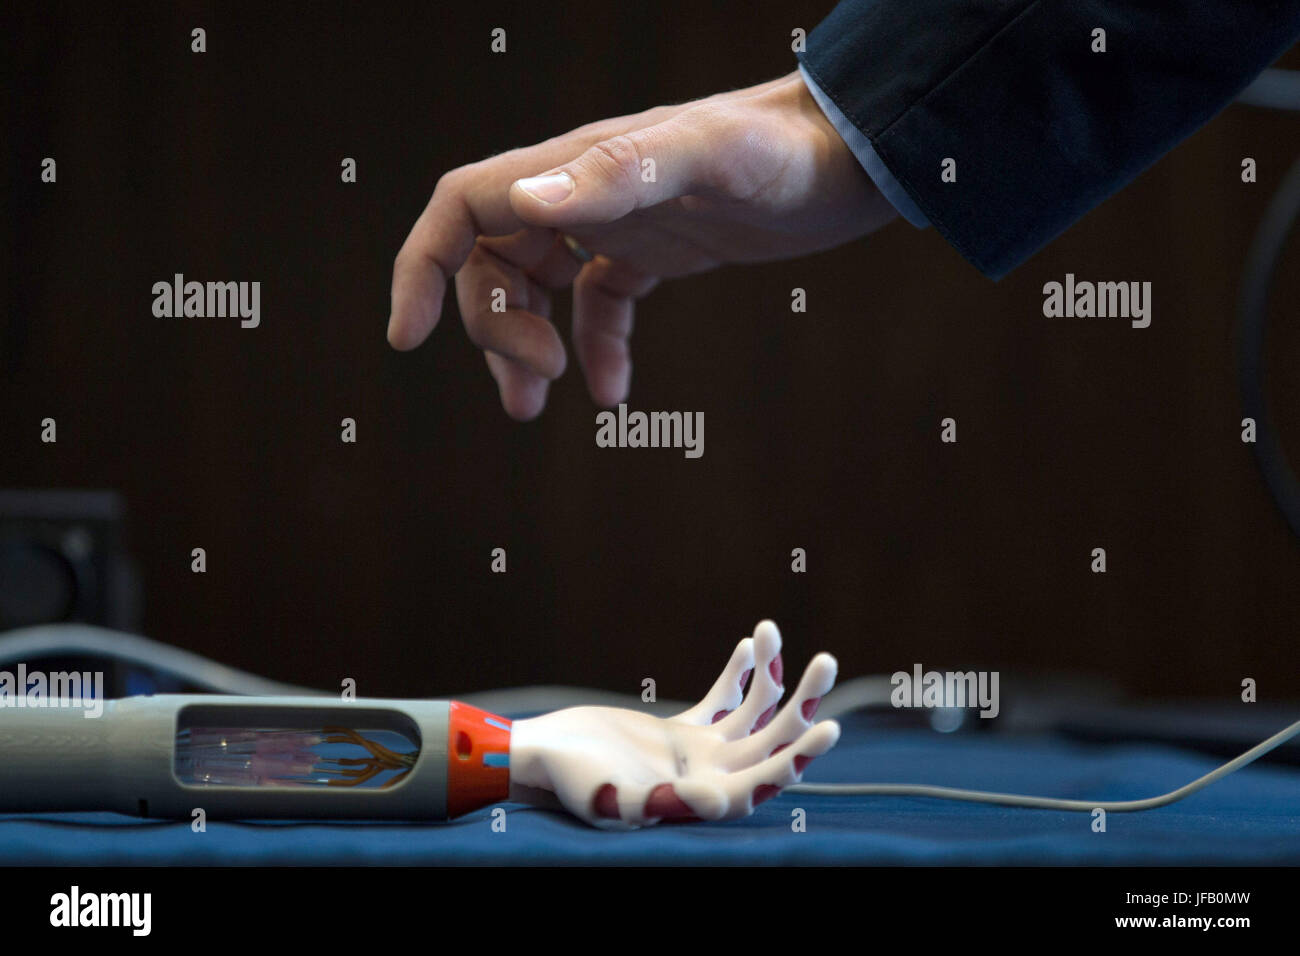 A soft prosthetic hand from the Queen Mary, University of London on display during the UK Robotics Week international robotics showcase, at Savoy Place in London. Stock Photo